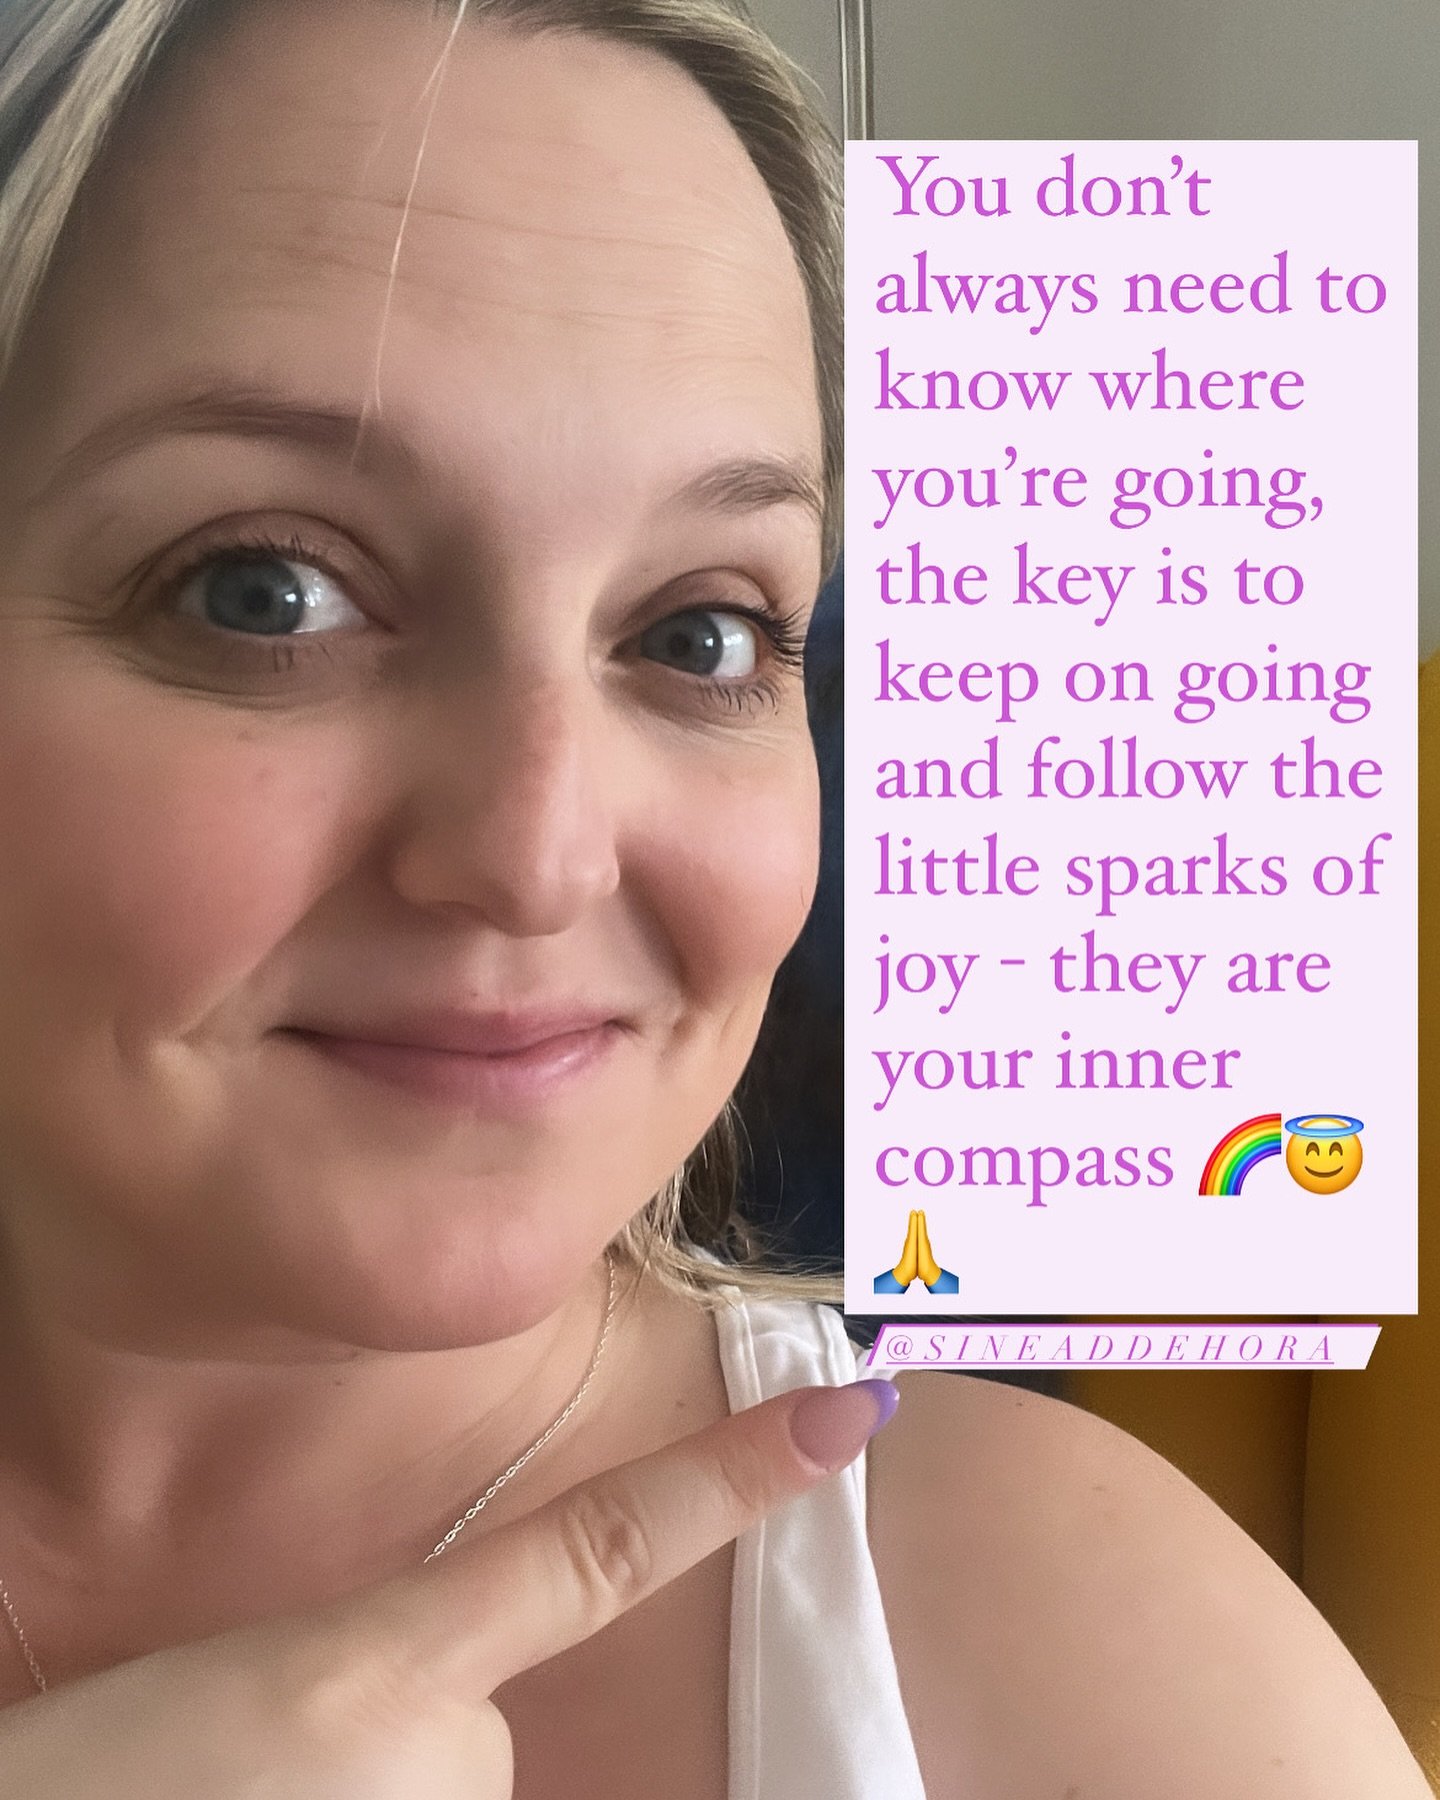 Continuing from Archangel Uriels message yesterday&hellip;. Imagine always knowing what&rsquo;s ahead? How boring would life be then? It&rsquo;s much more exciting to just follow the breadcrumbs, aka, the little sparks of joy that you instantly get w